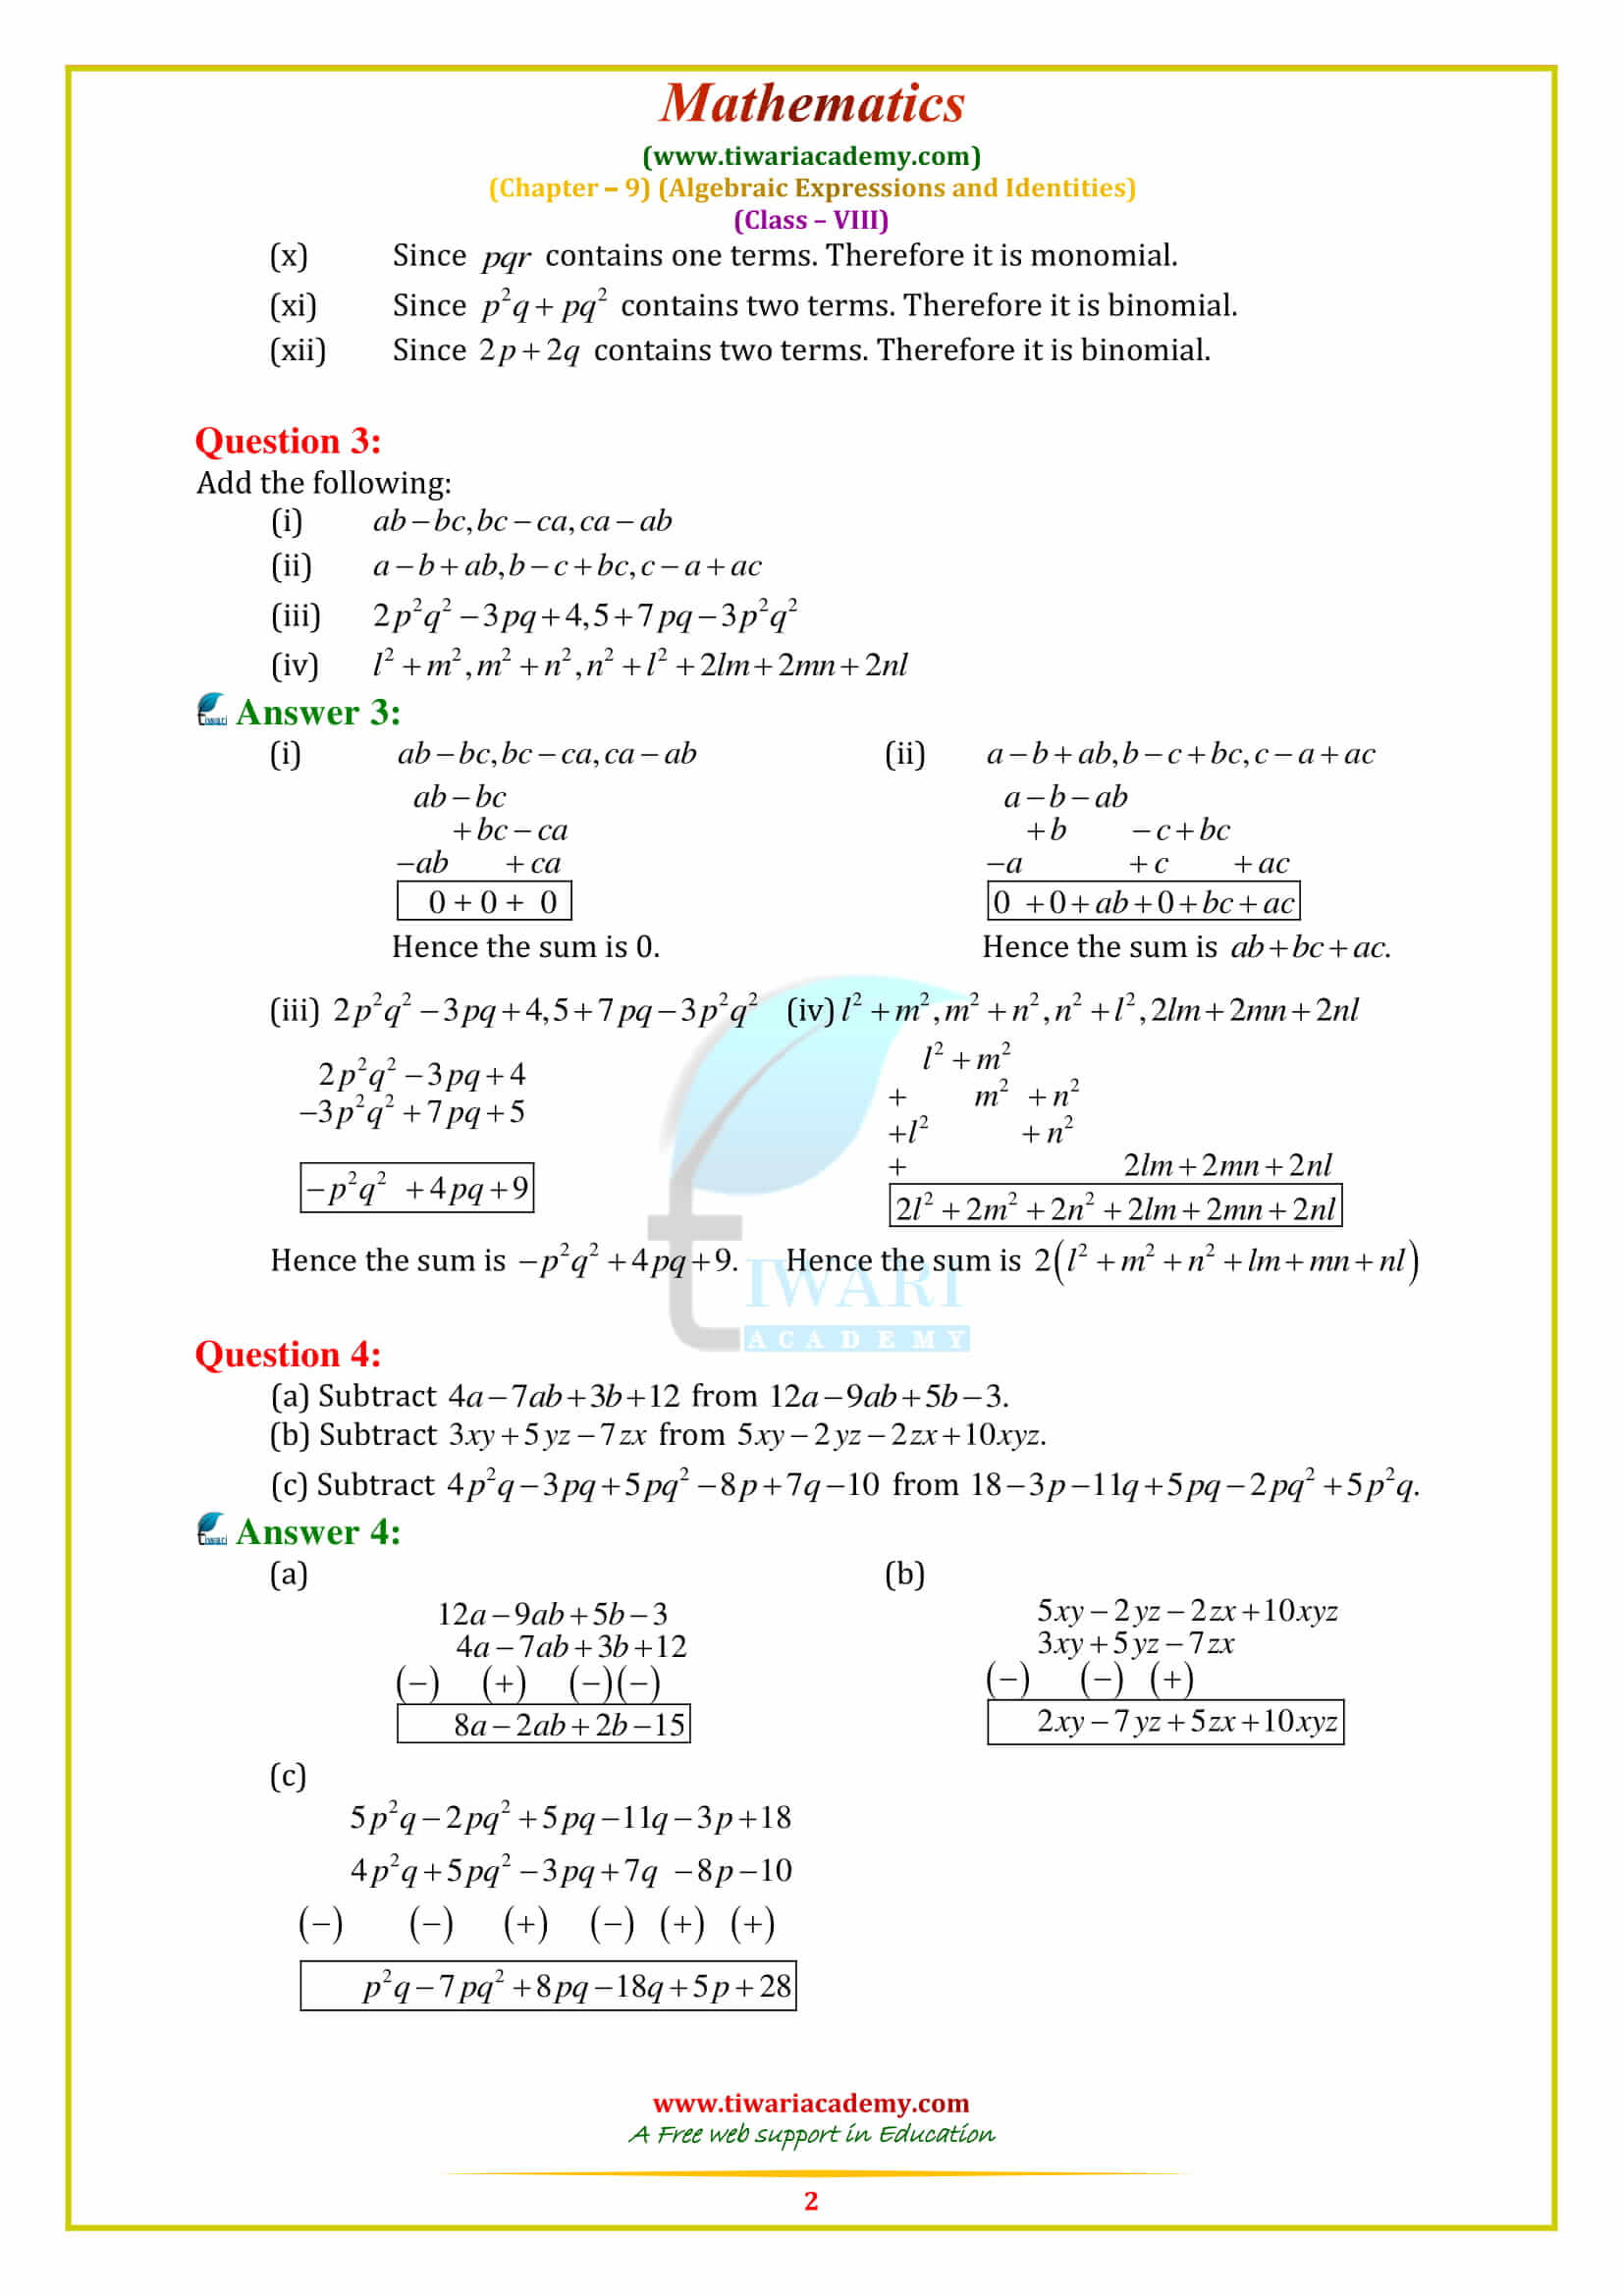 NCERT Solutions for Class 8 Maths Chapter 9 ALGEBRAIC EXPRESSIONS AND IDENTITIES in pdf form